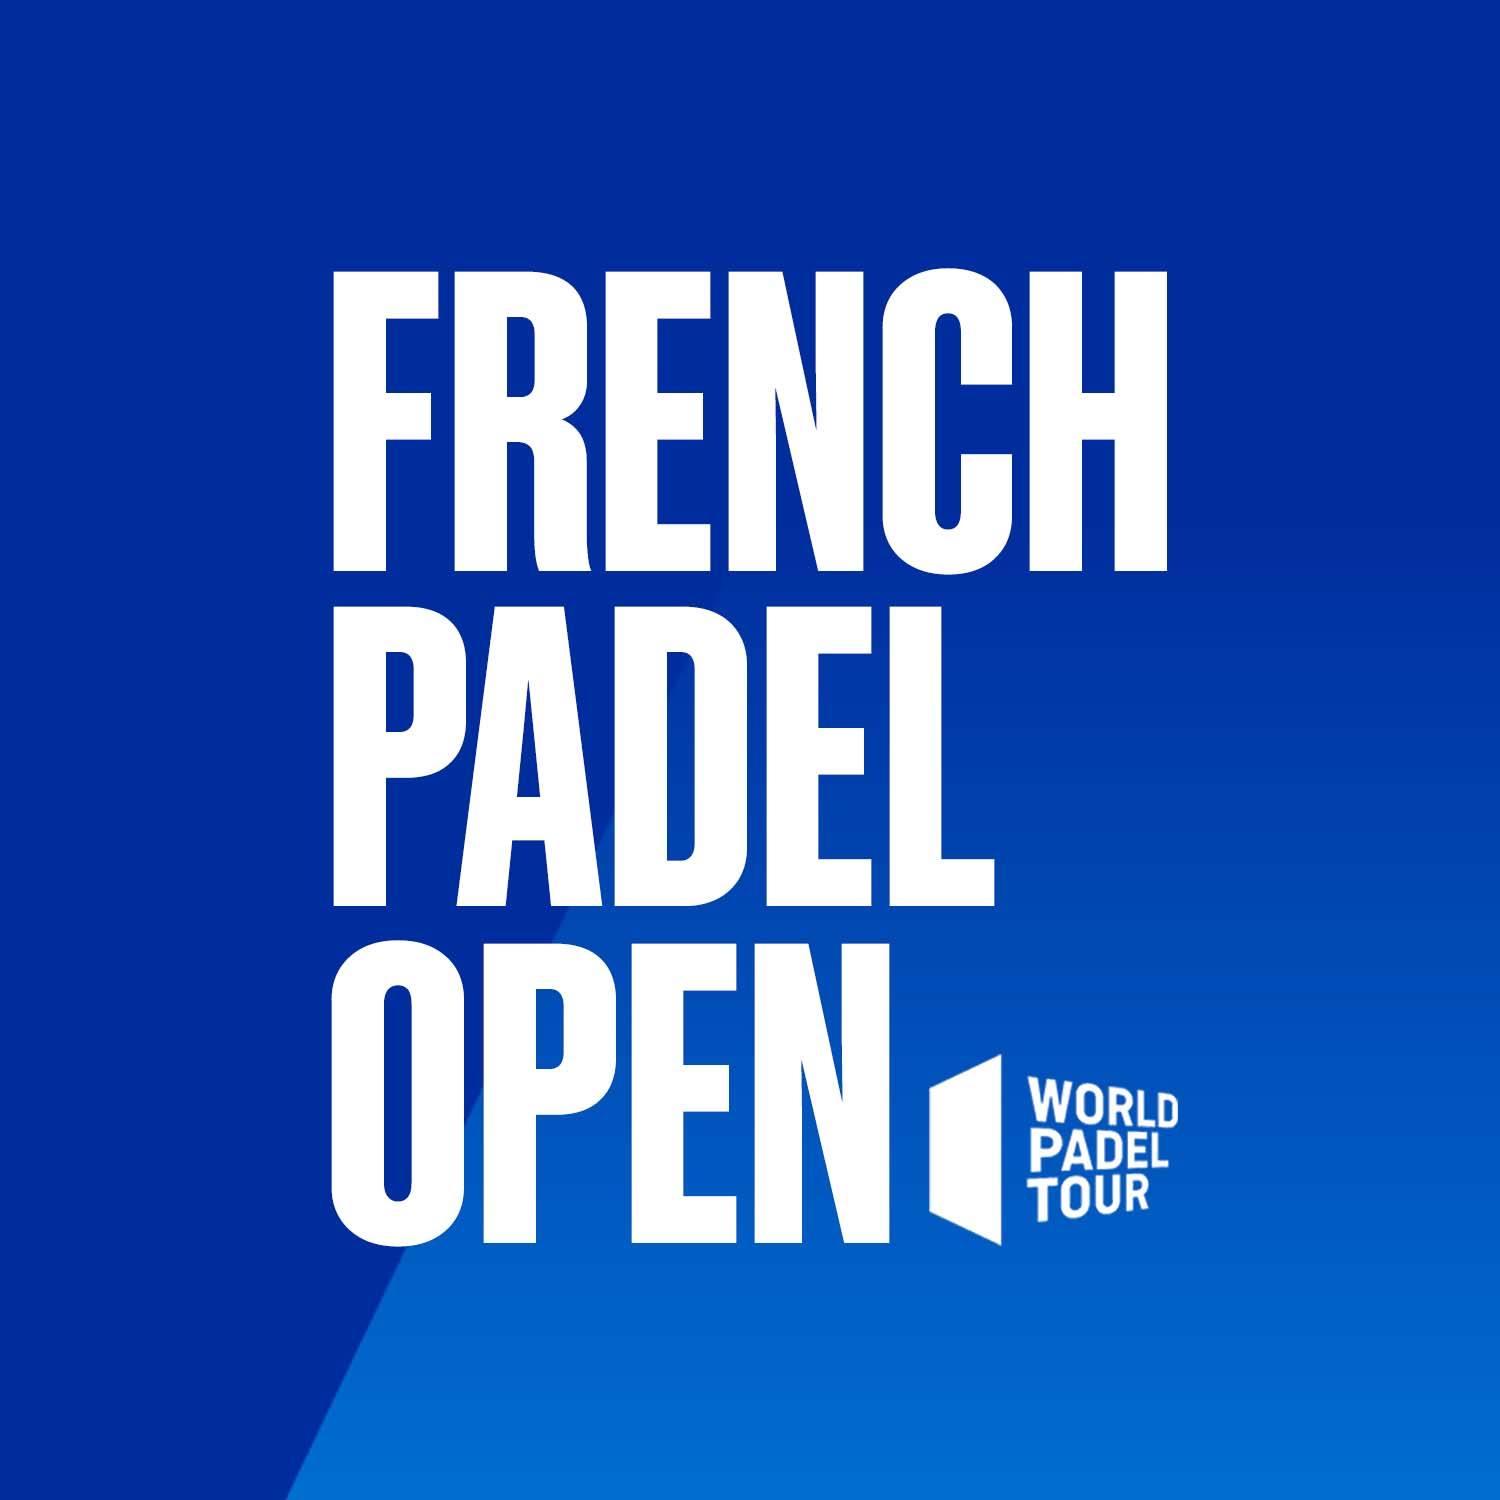 World Padel Tour French Open: the Ticket Office soon to open